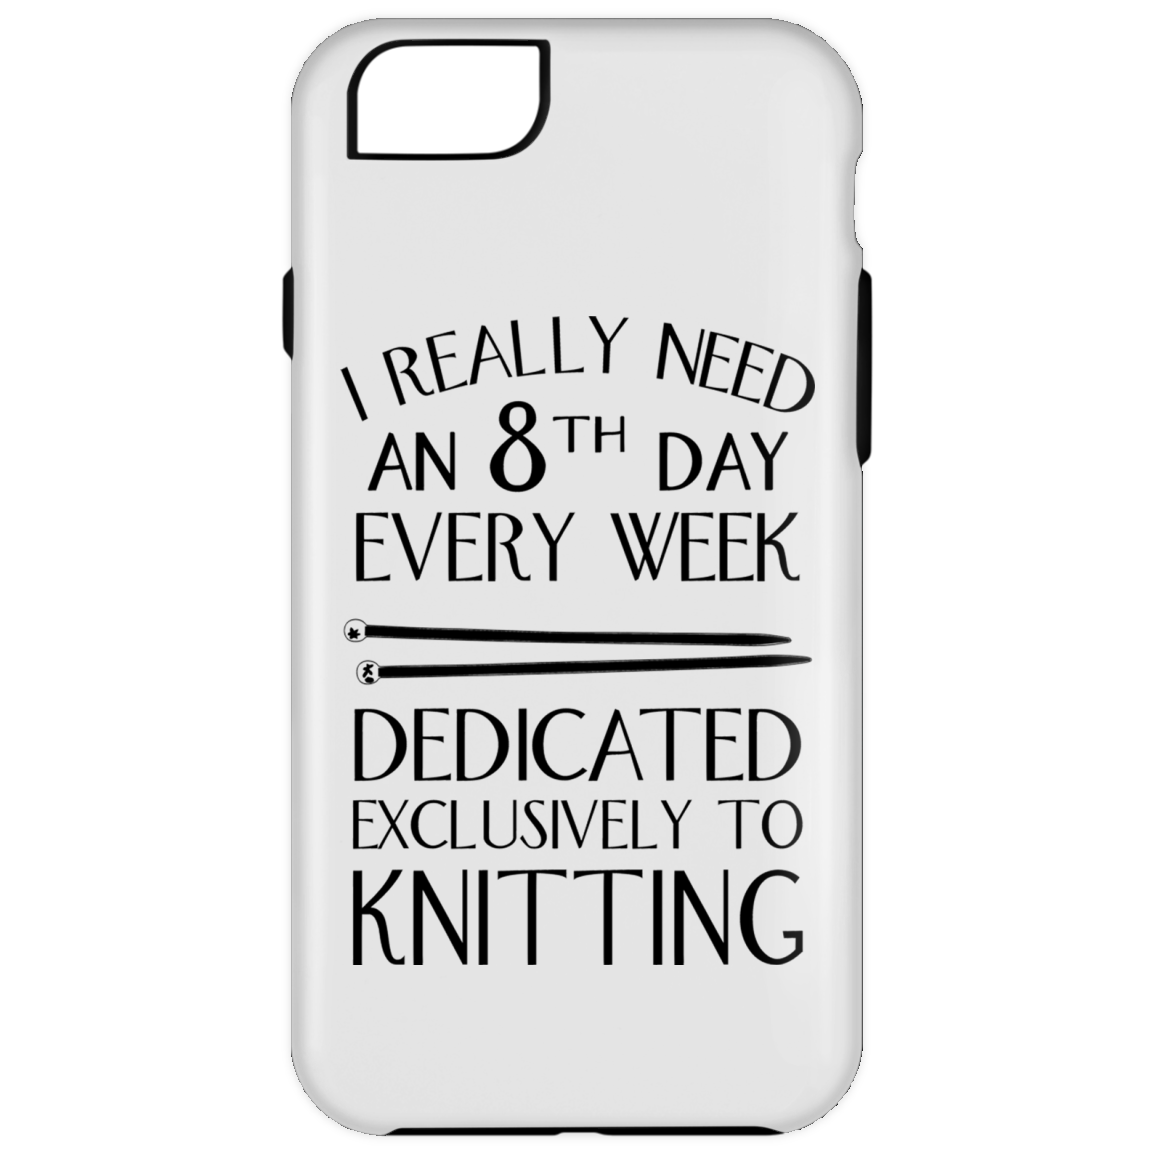 8th Day For Knitting iPhone Cases